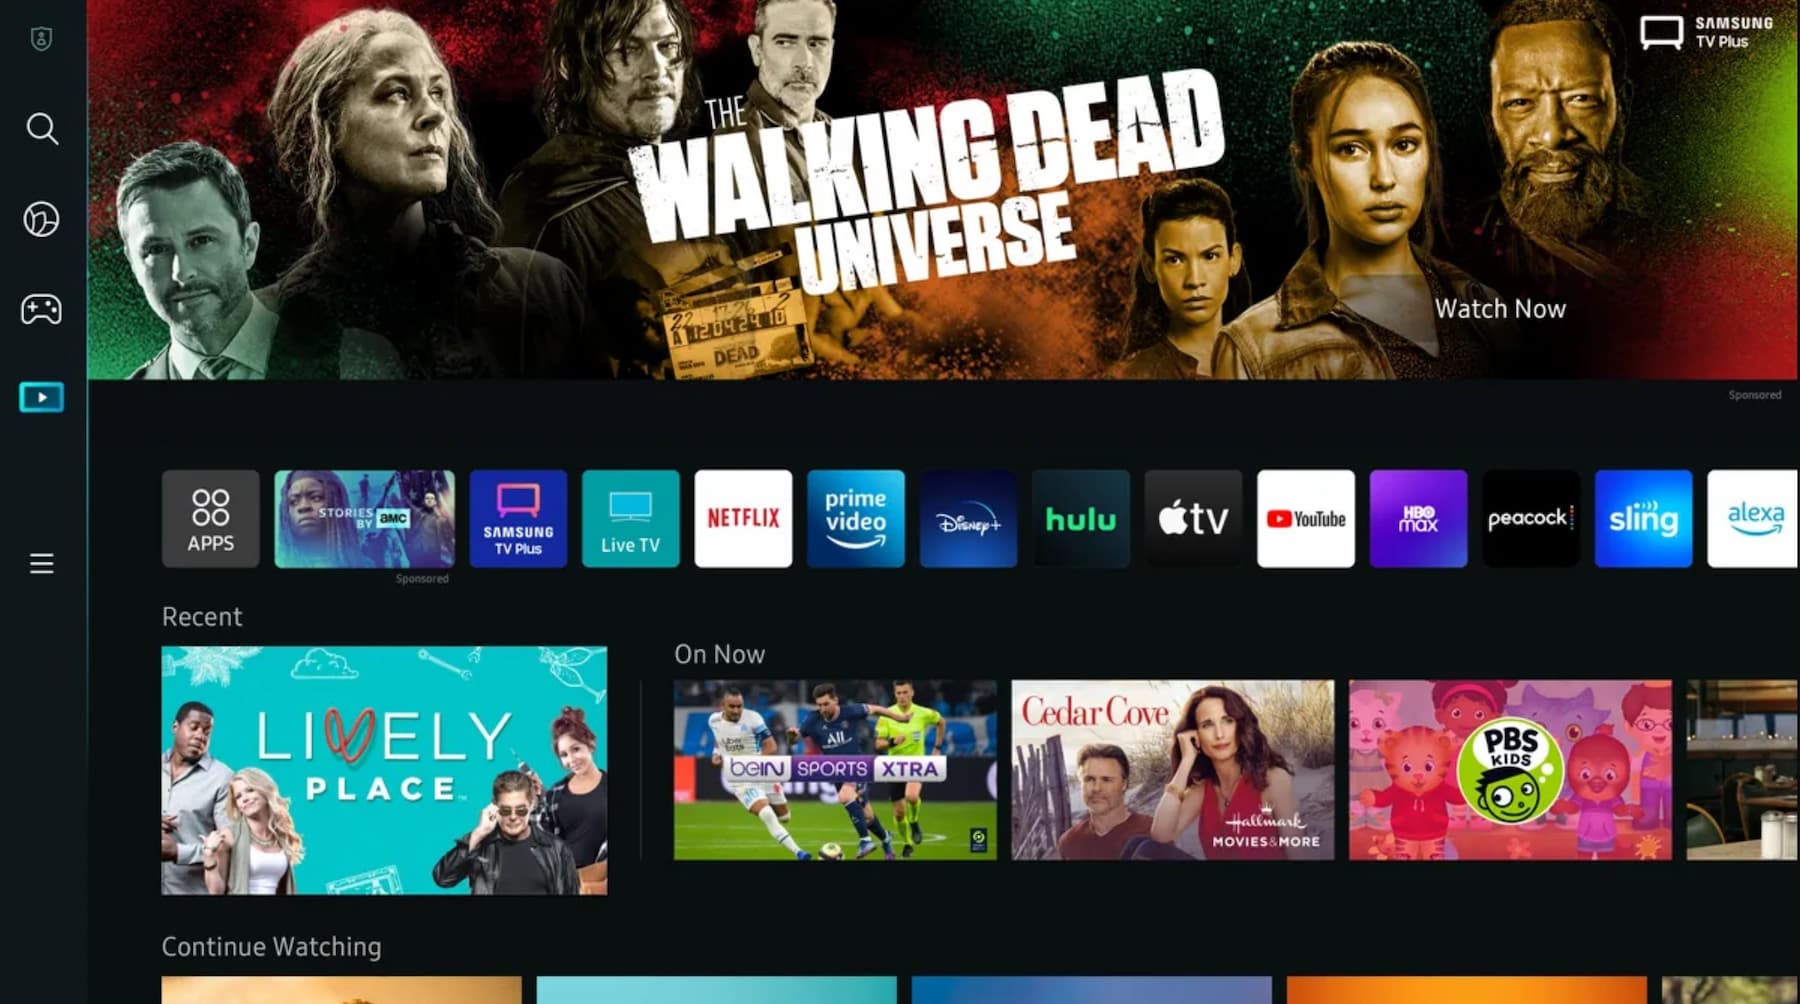 What Apps Are Available On Samsung Smart TV